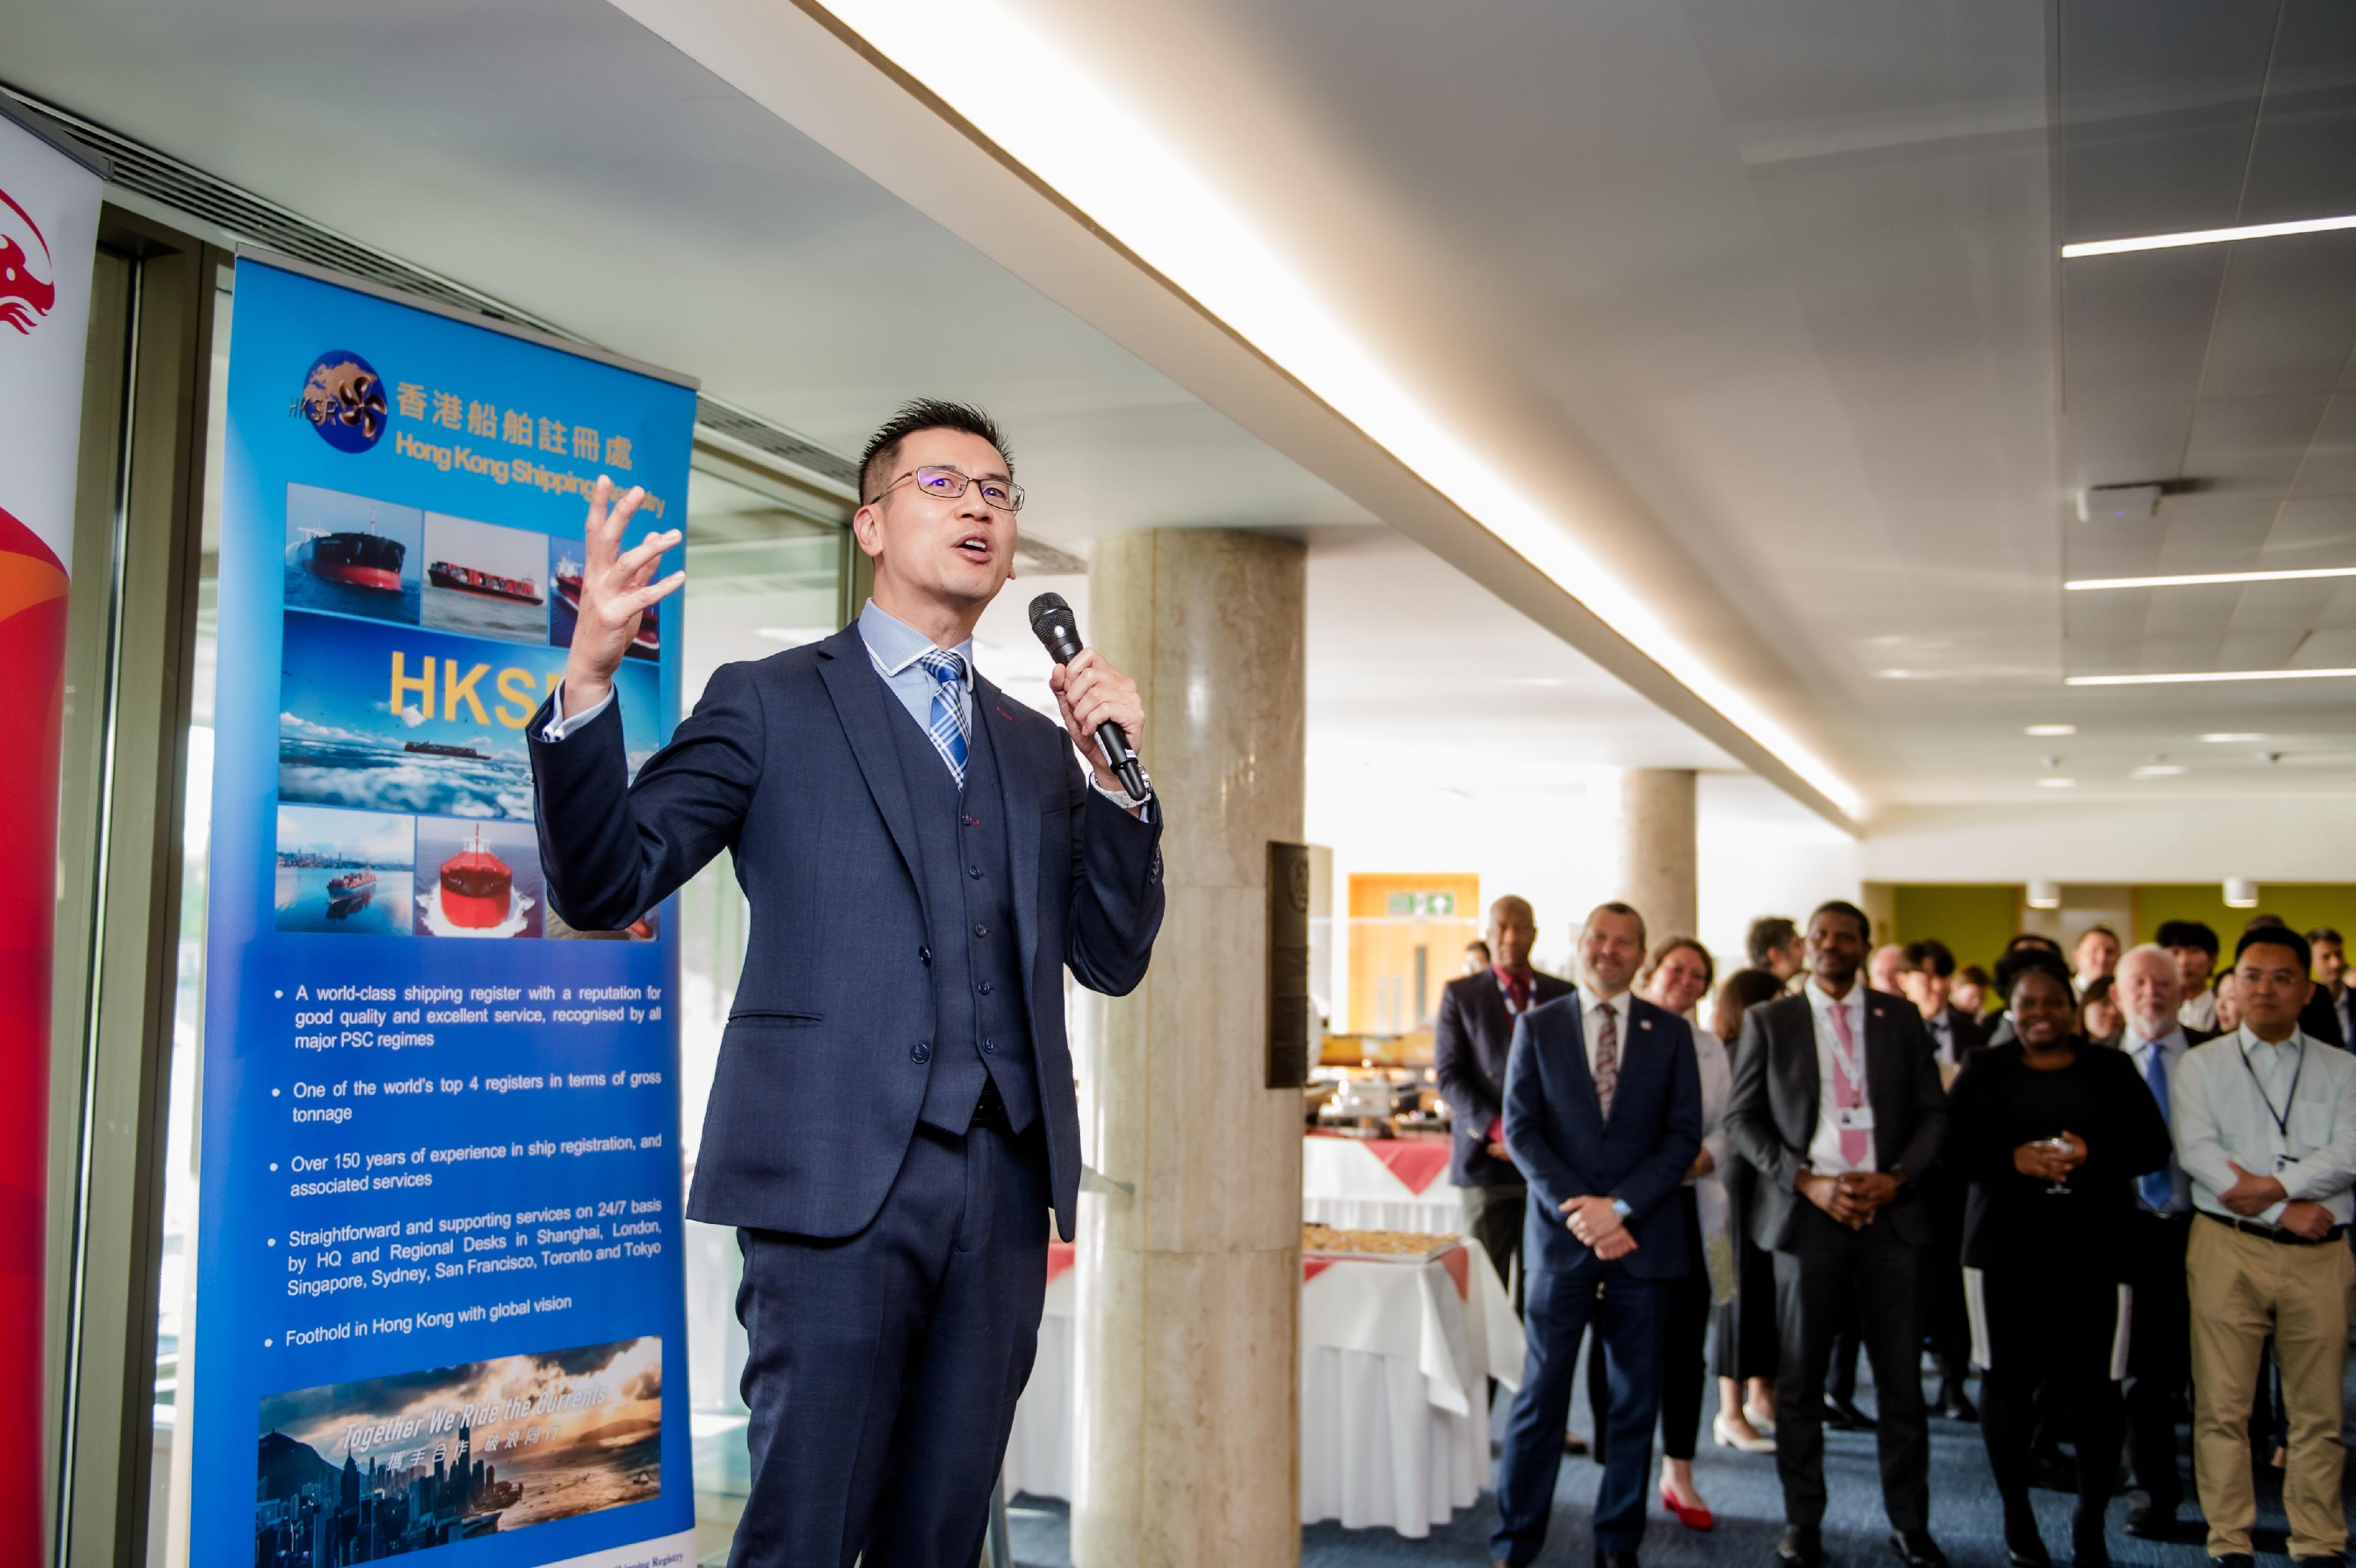 The Hong Kong Economic and Trade Office, London (London ETO), with the support of the Marine Department, held the Taste of Hong Kong reception at the International Maritime Organization on May 23 (London time). Photo shows the Director-General of London ETO, Mr Gilford Law, delivering a speech at the reception.